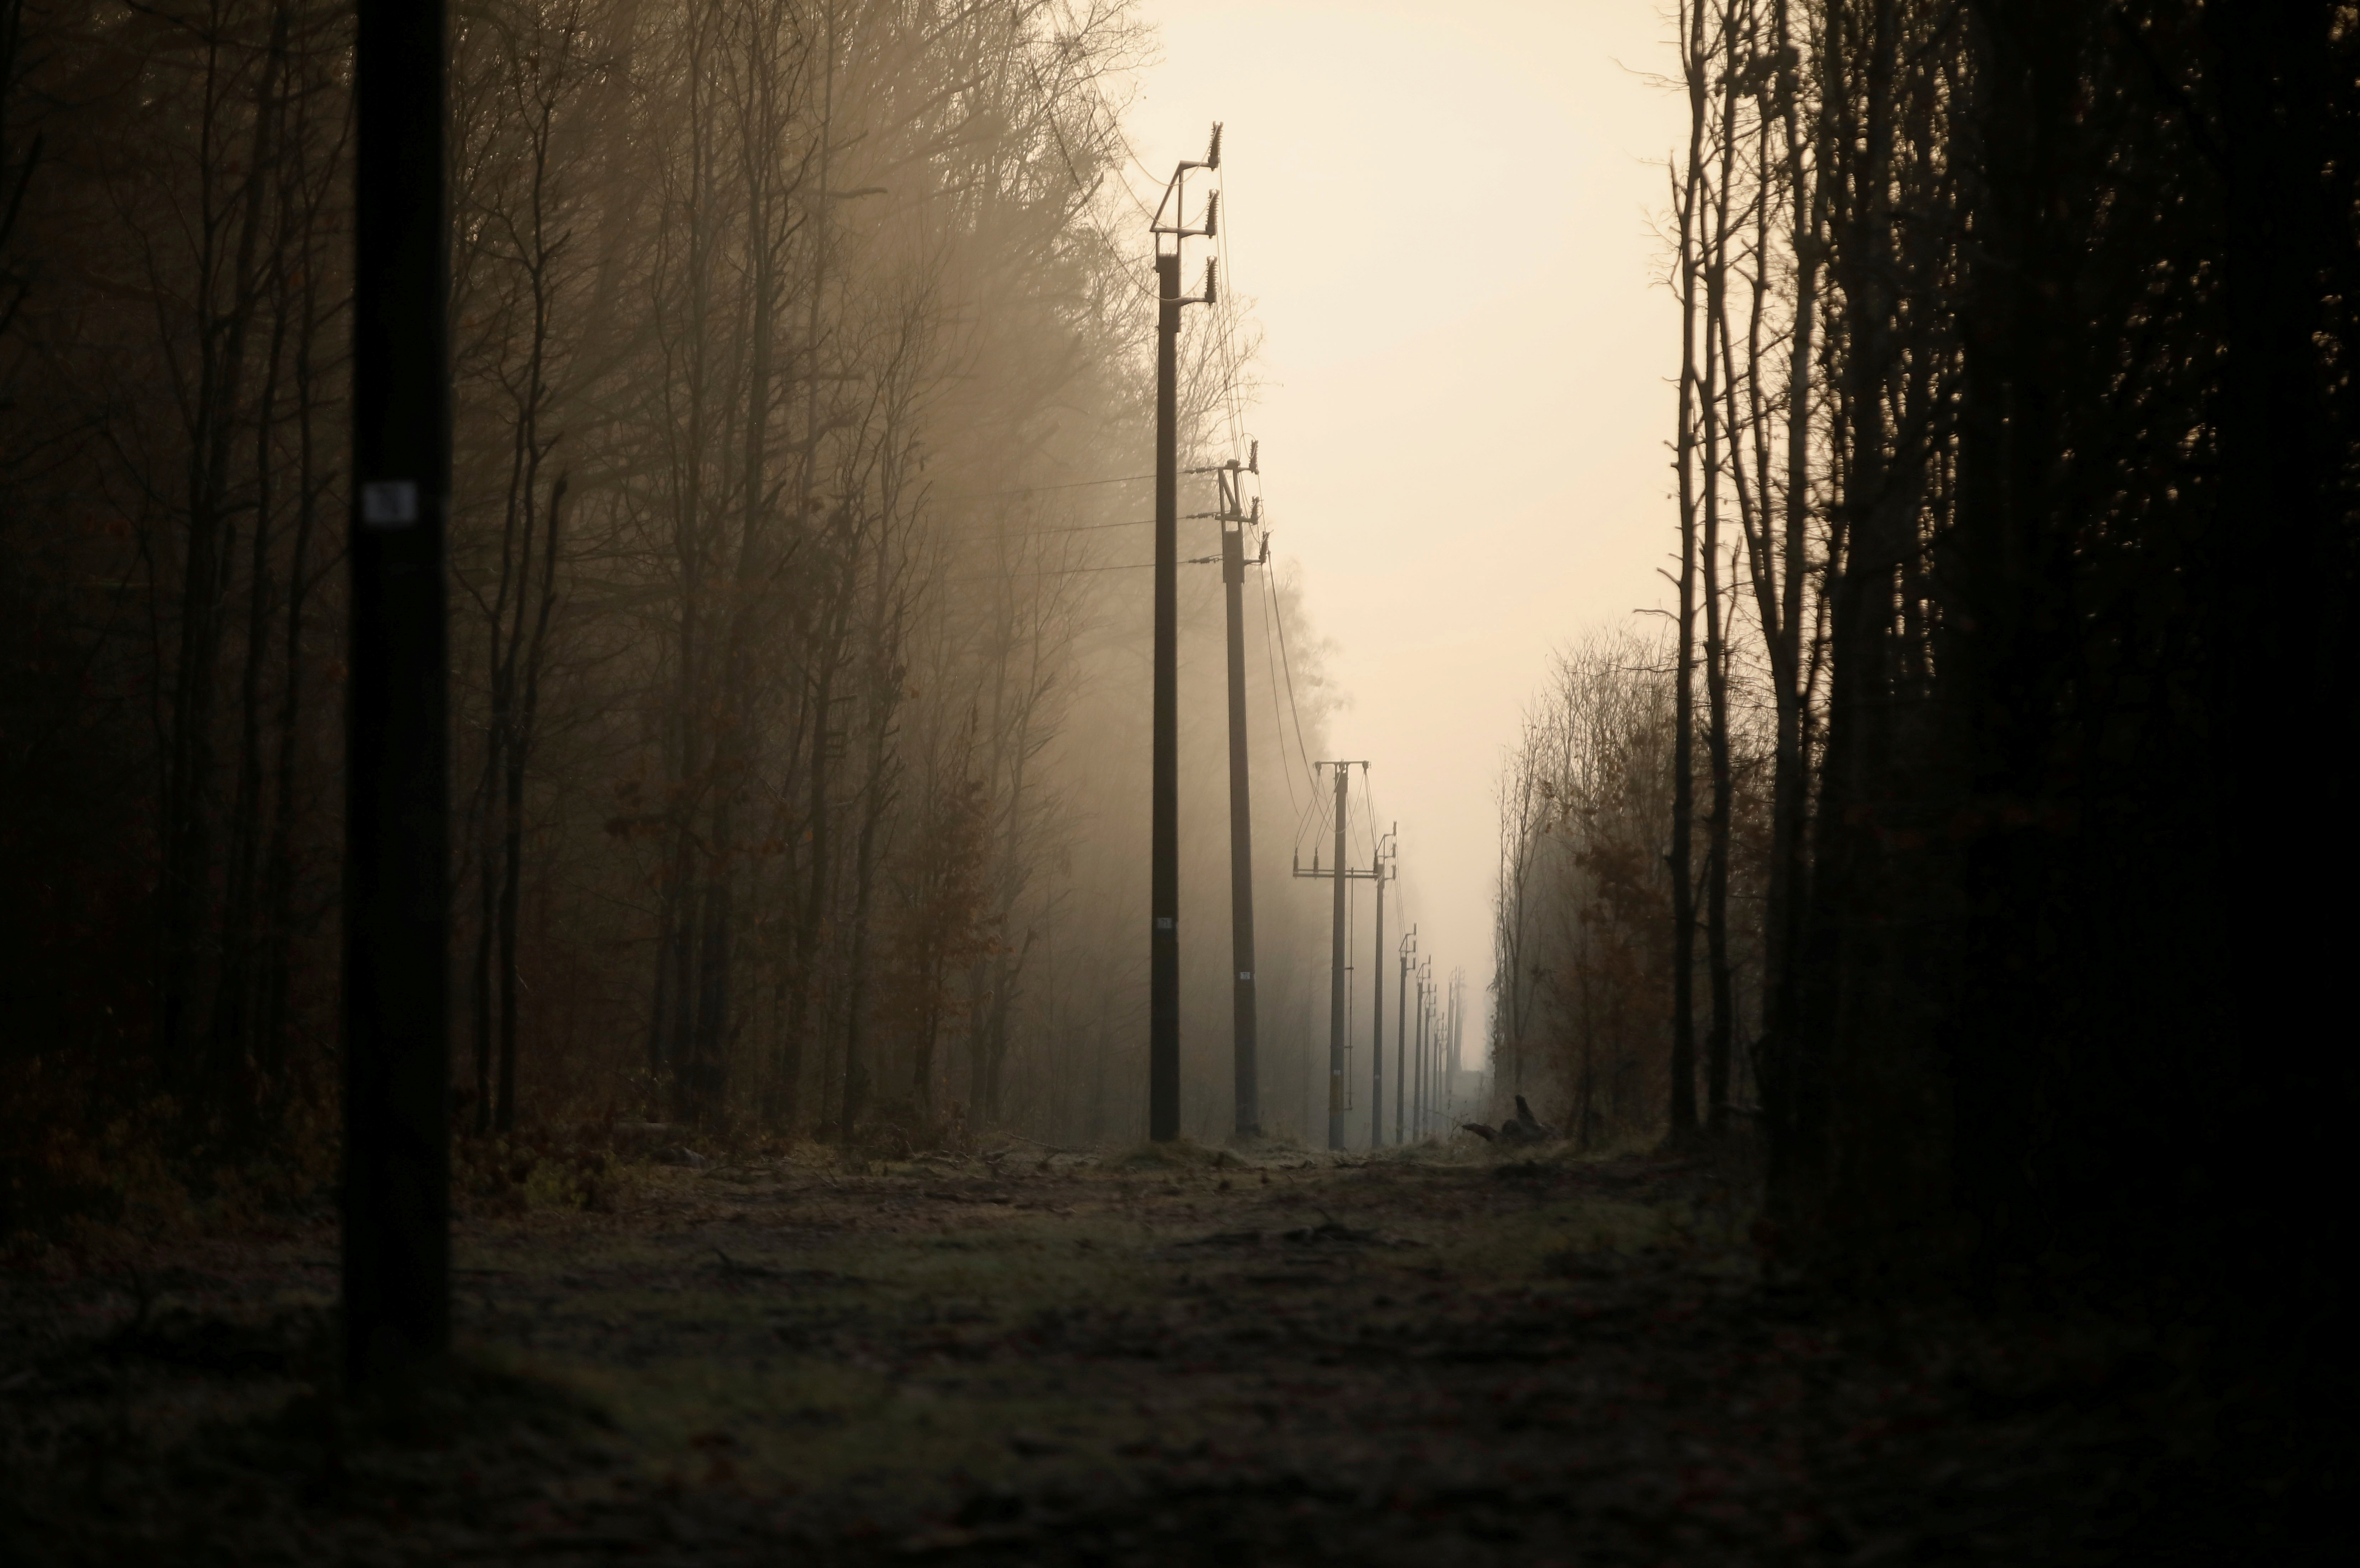 Electric poles are seen in the morning near the road connecting the border village of Bialowieza to Hajnowka during the migrant crisis on the Belarusian-Polish border near Hajnowka, Poland, November 11, 2021. REUTERS / Kacper Pempel